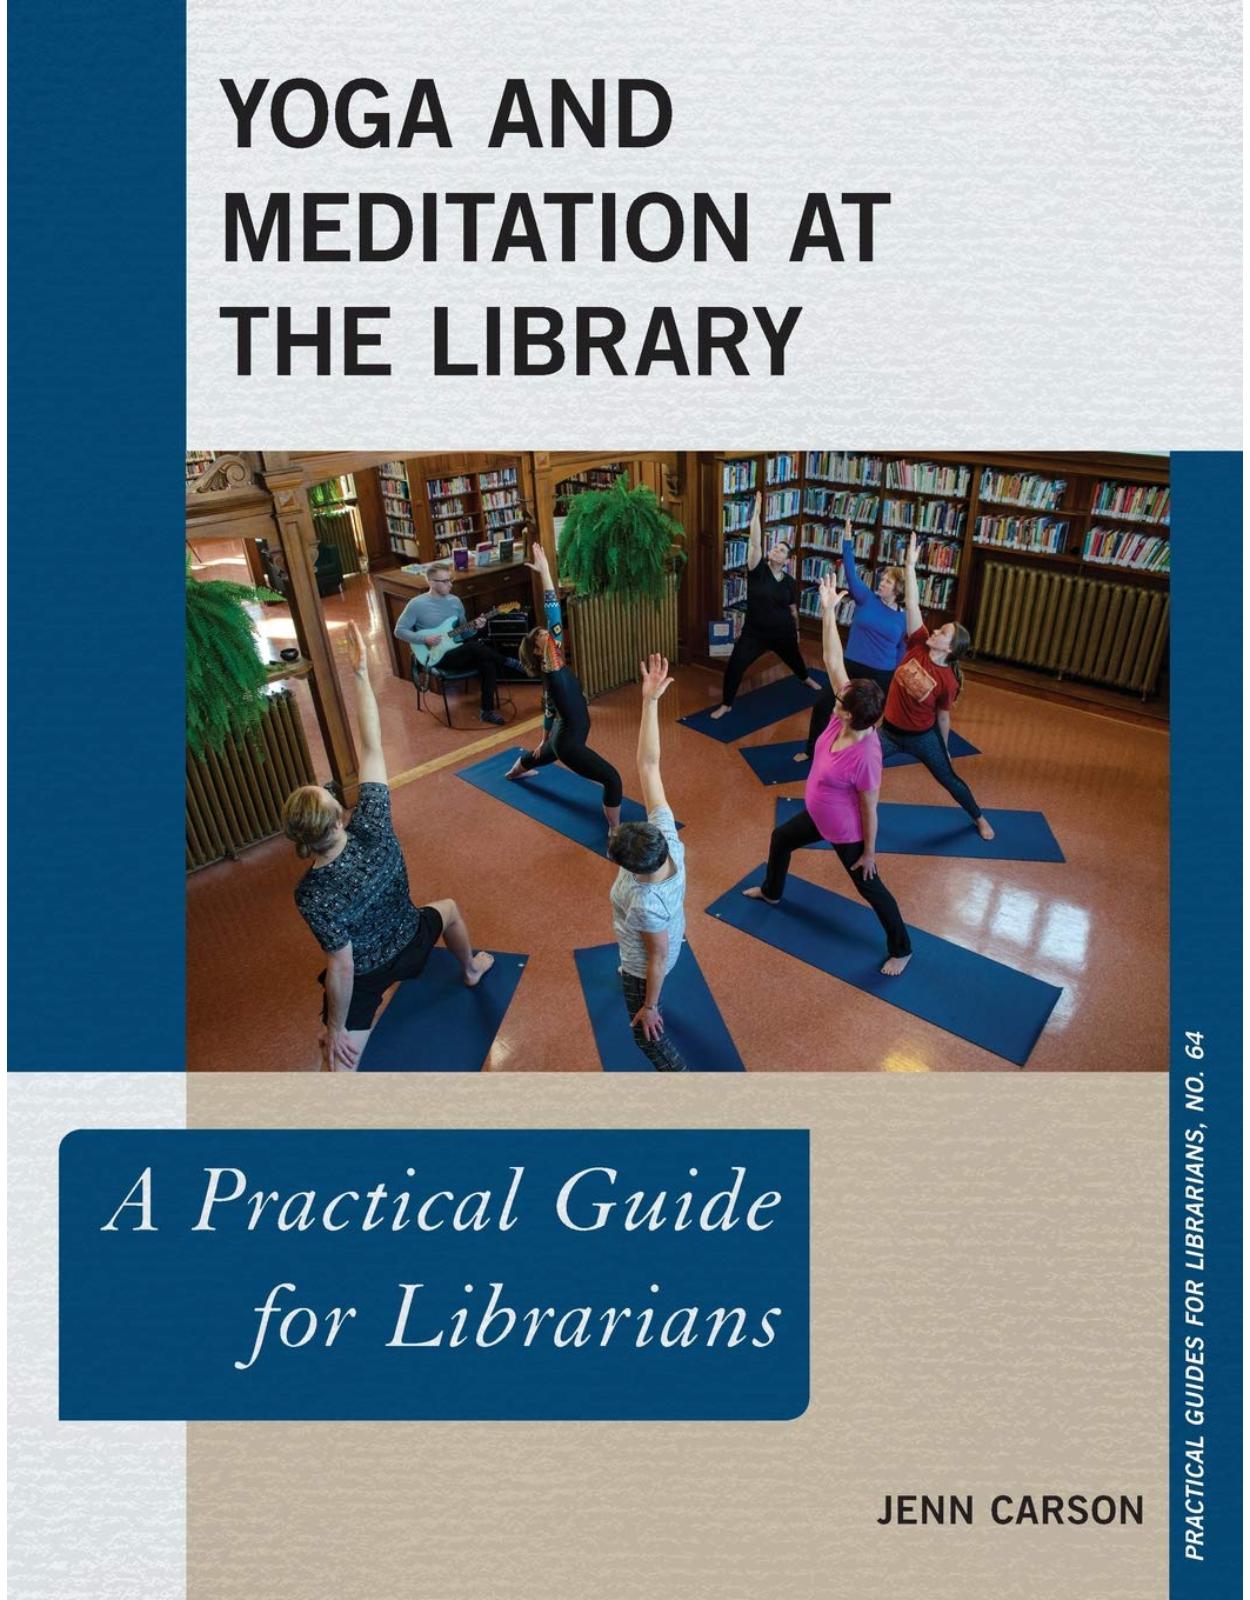 Yoga and Meditation at the Library. A Practical Guide for Librarians